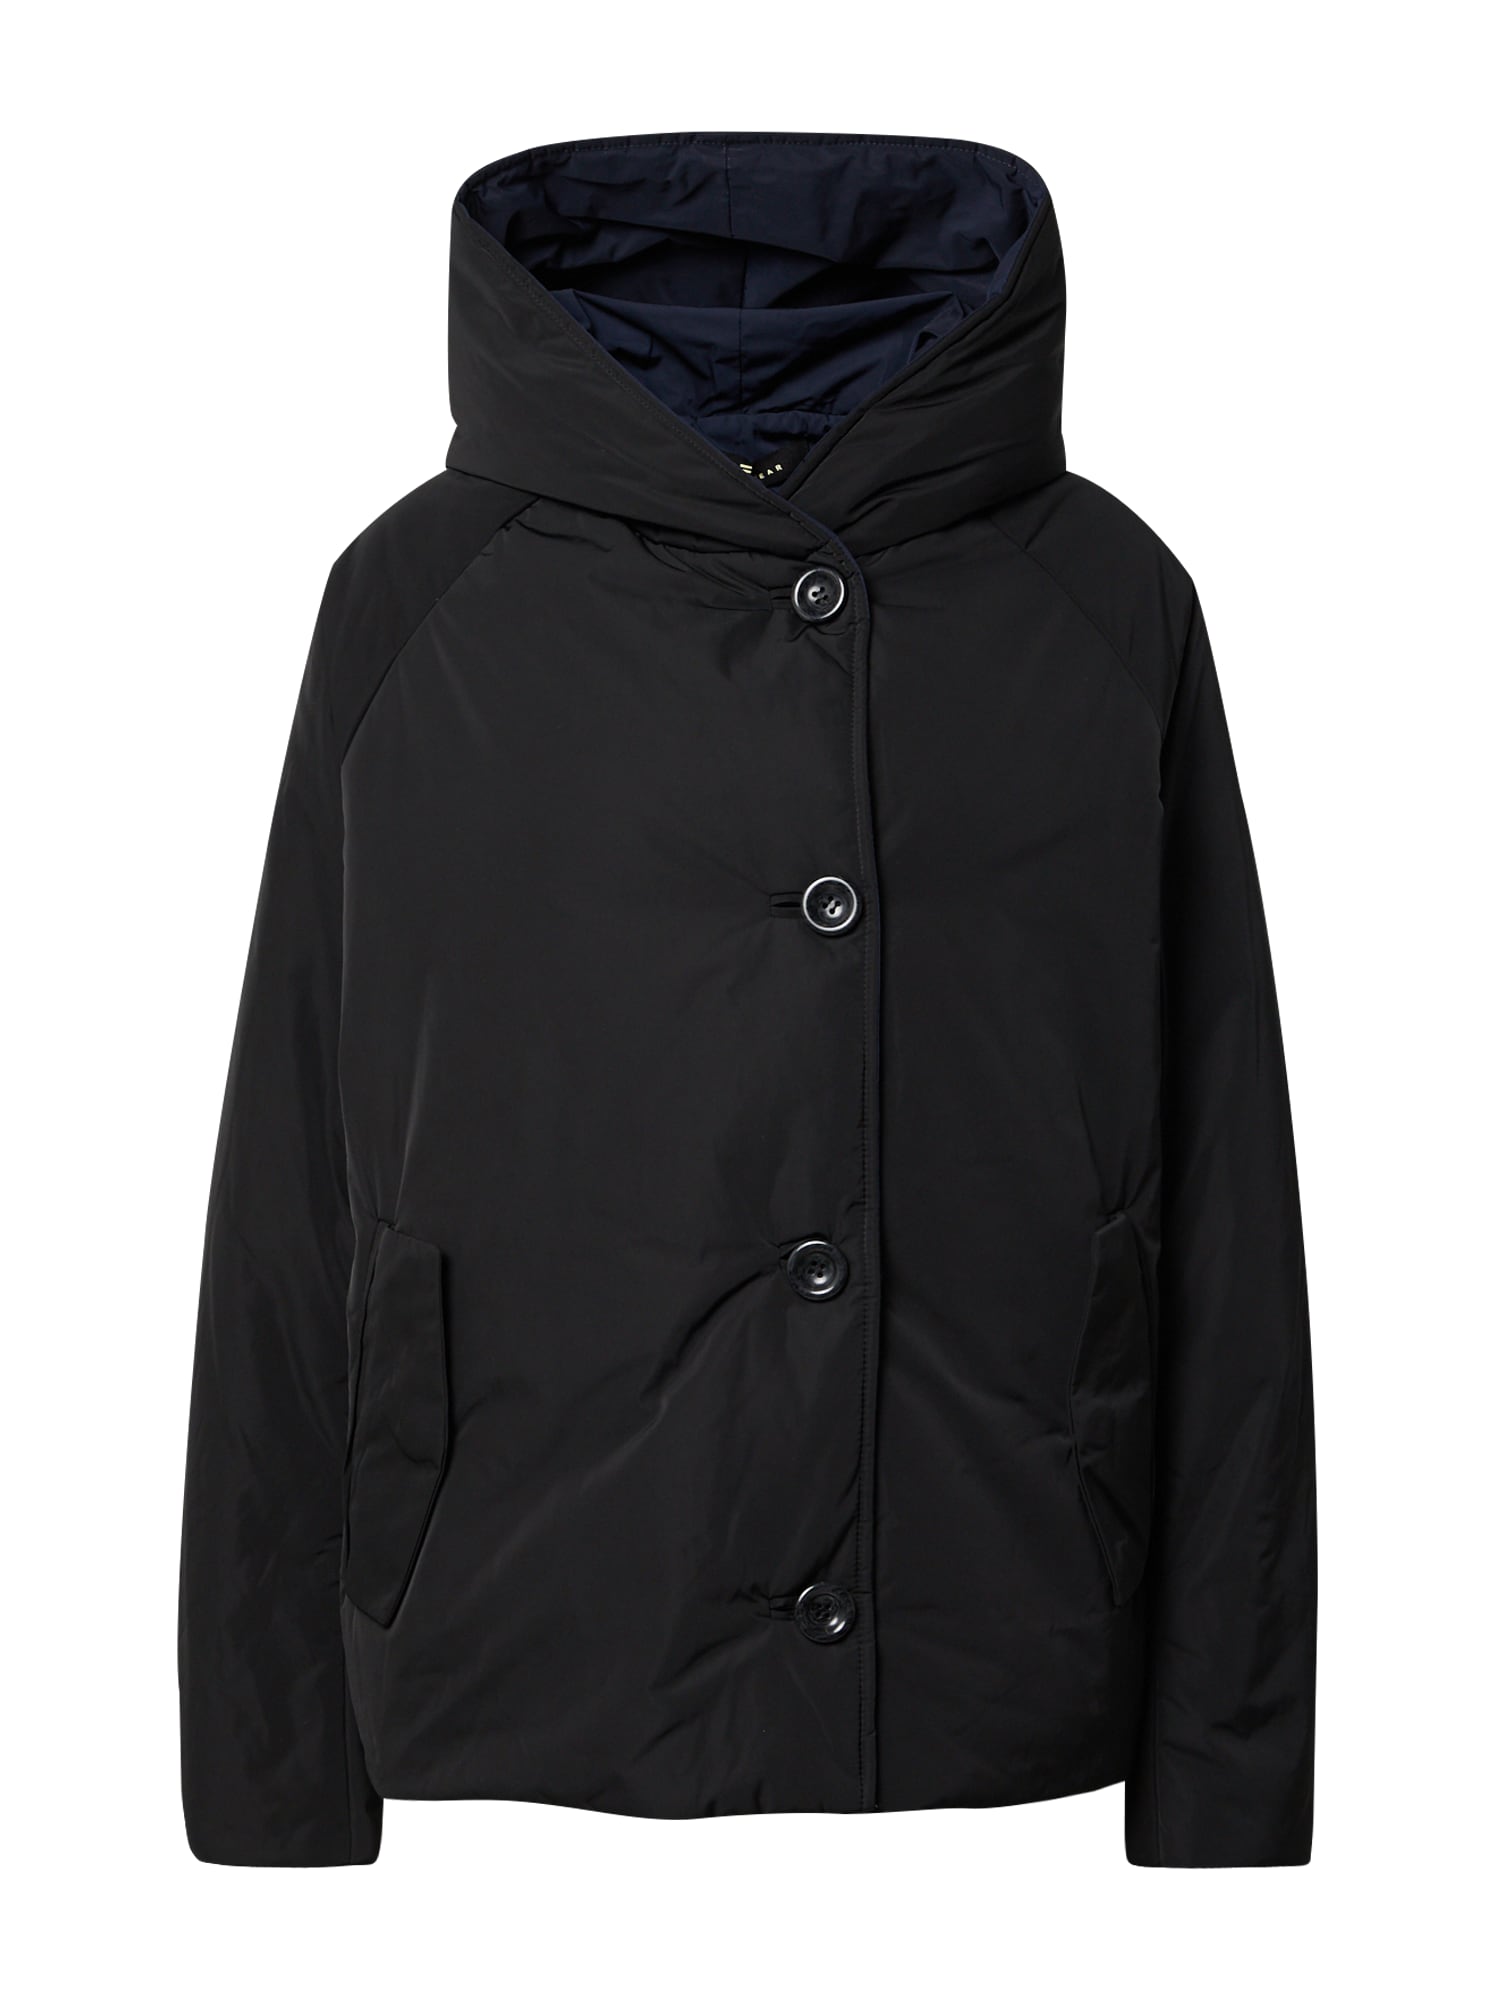 OOF WEAR Giacca invernale  nero / navy